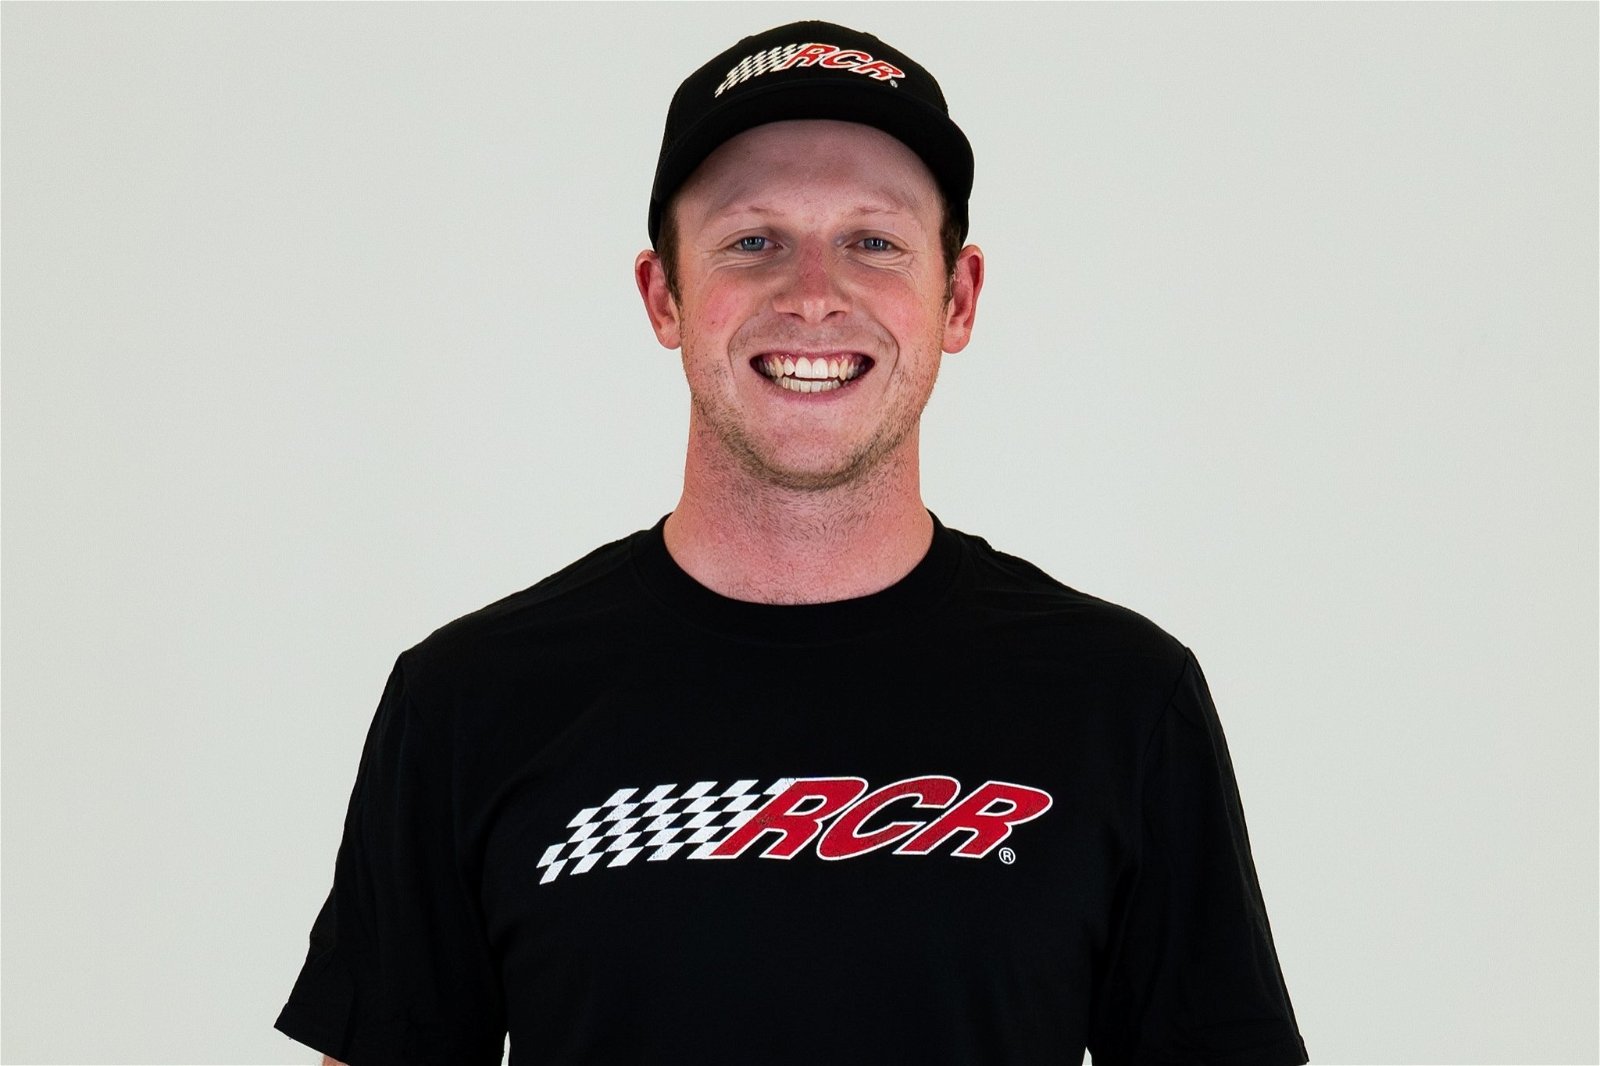 Will Brown wearing a Richard Childress Racing t-shirt and hat, to announce his NASCAR debut with the team. Image: Will Brown Instagram